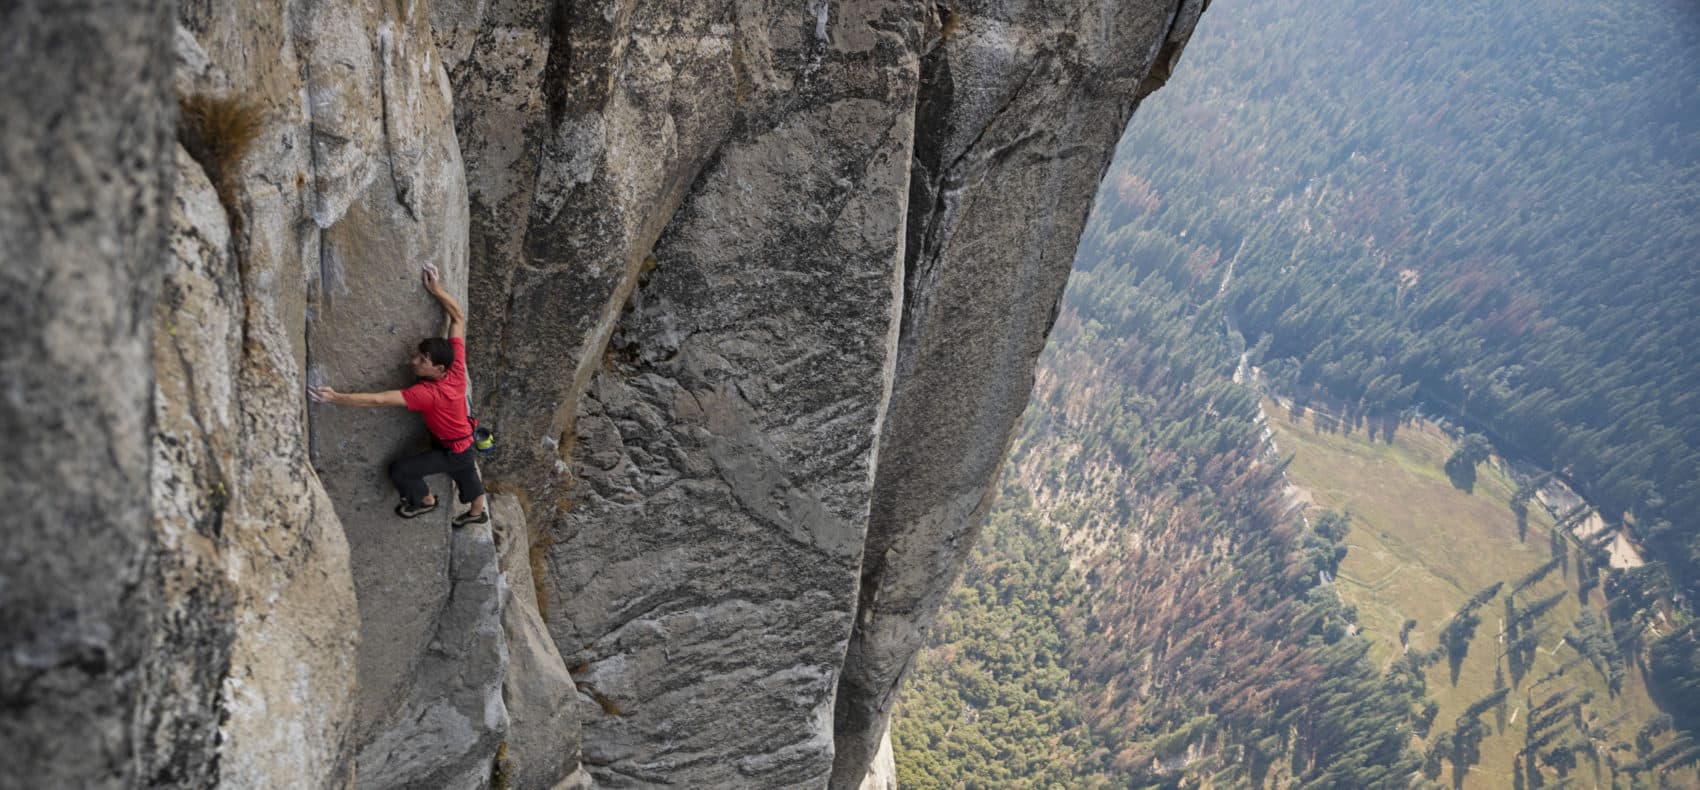 Alex Honnold free-solo climbs El Capitan's Freerider in Yosemite National Park. (Jimmy Chin/Courtesy of National Geographic)